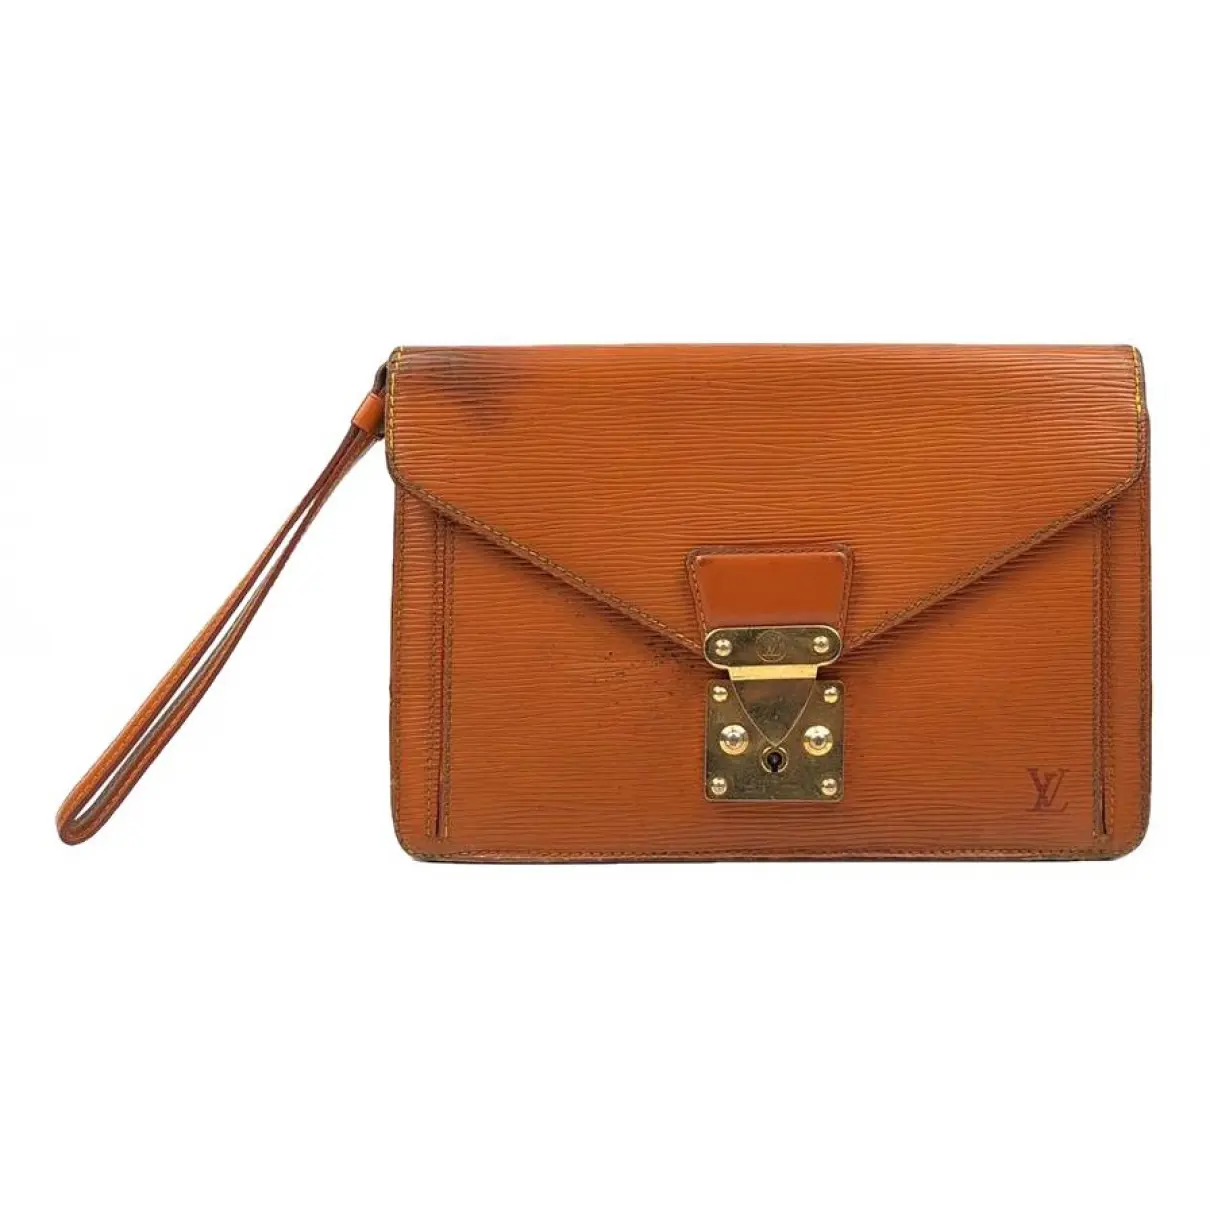 Sellier leather clutch bag